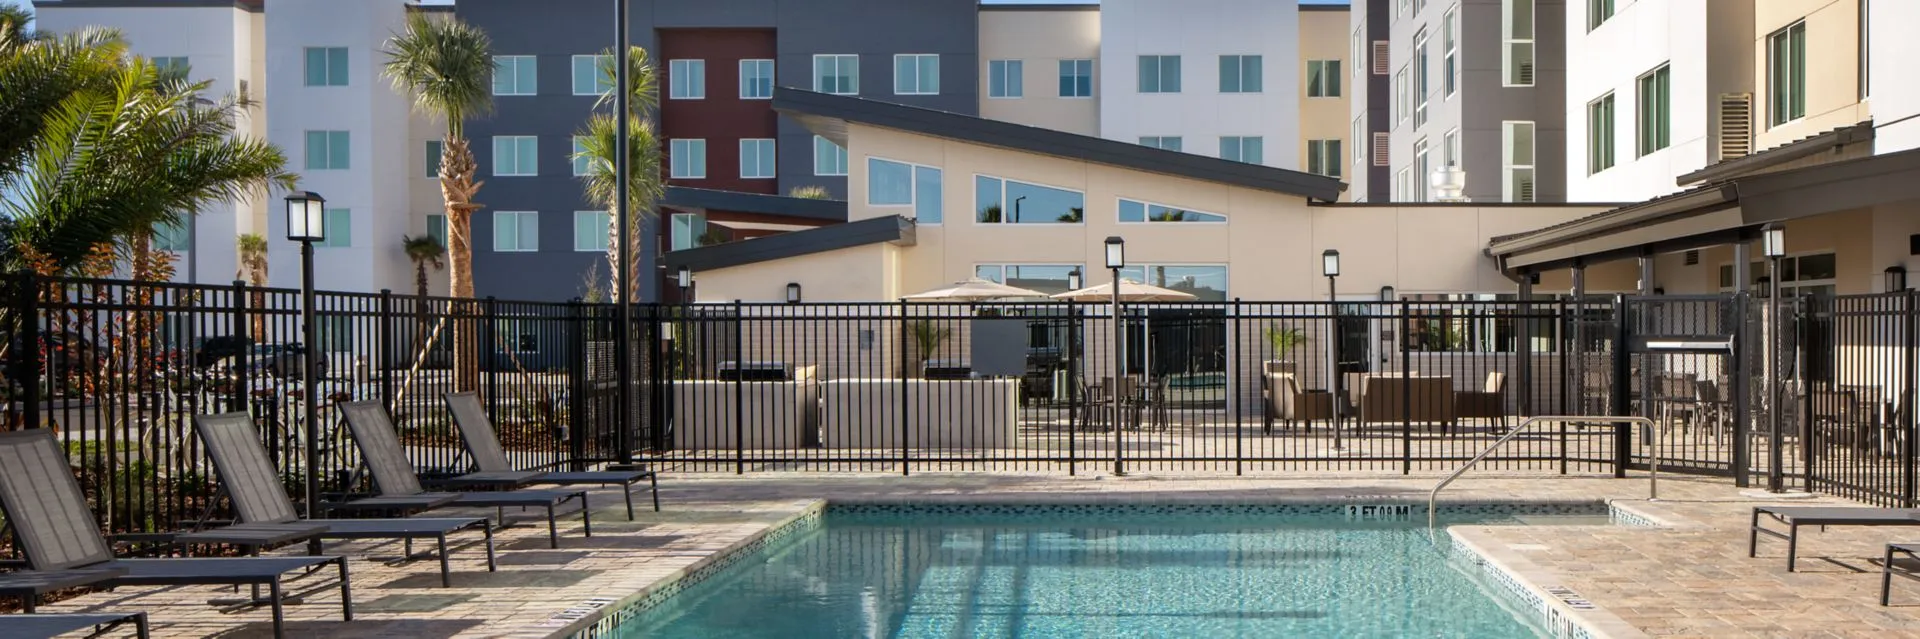 Residence Inn Tampa Wesley Chapel piscina al aire libre